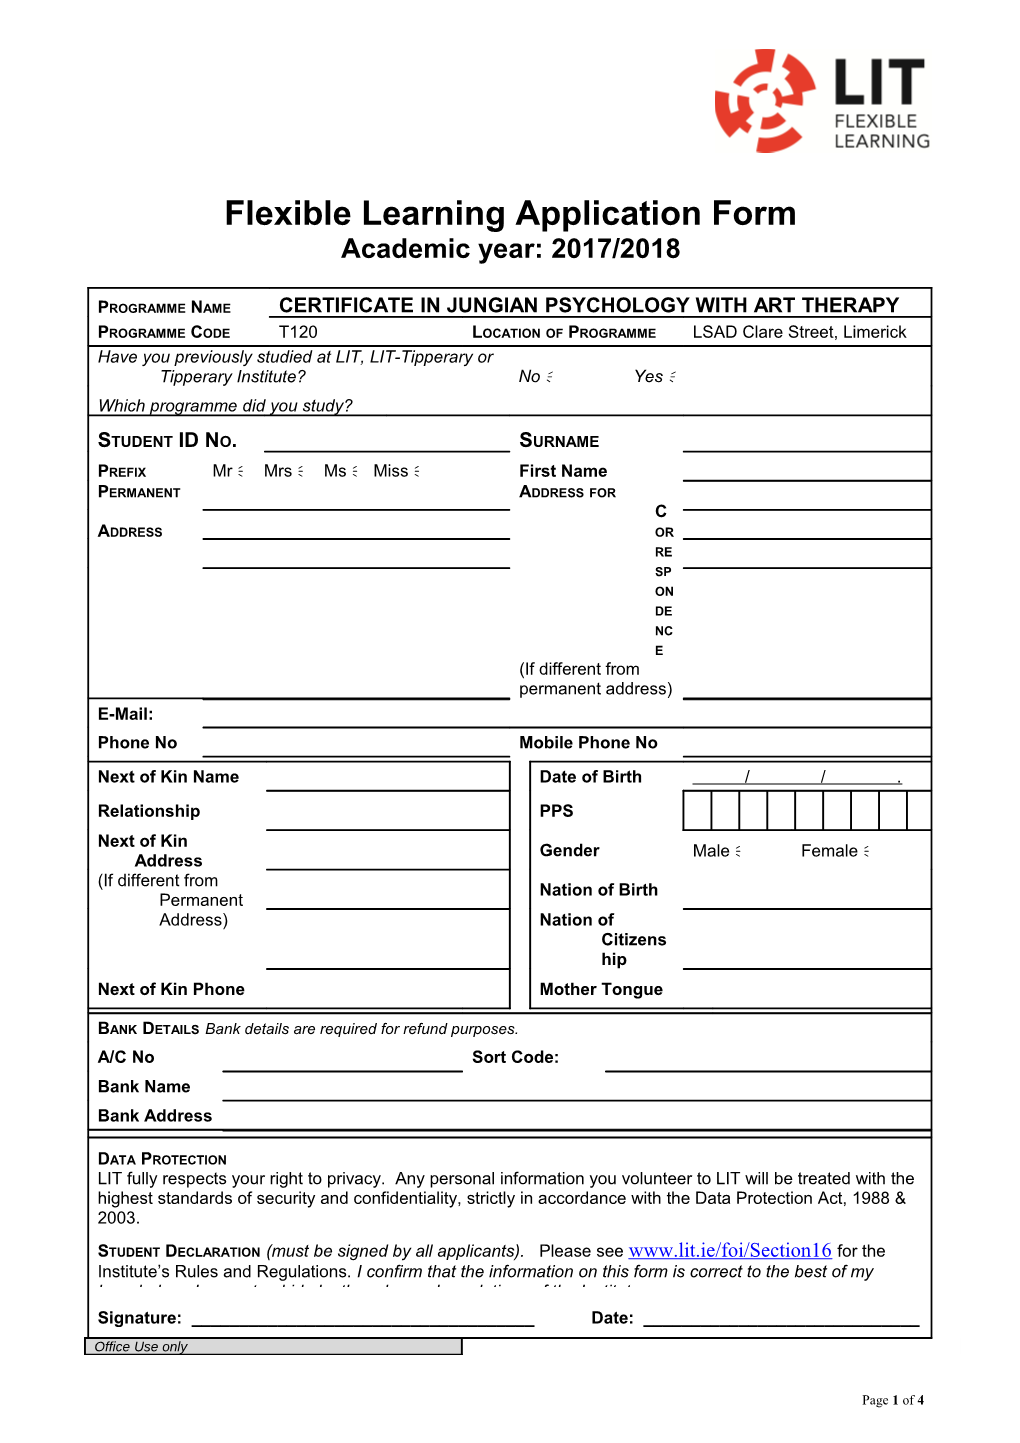 Flexible Learning Application Form